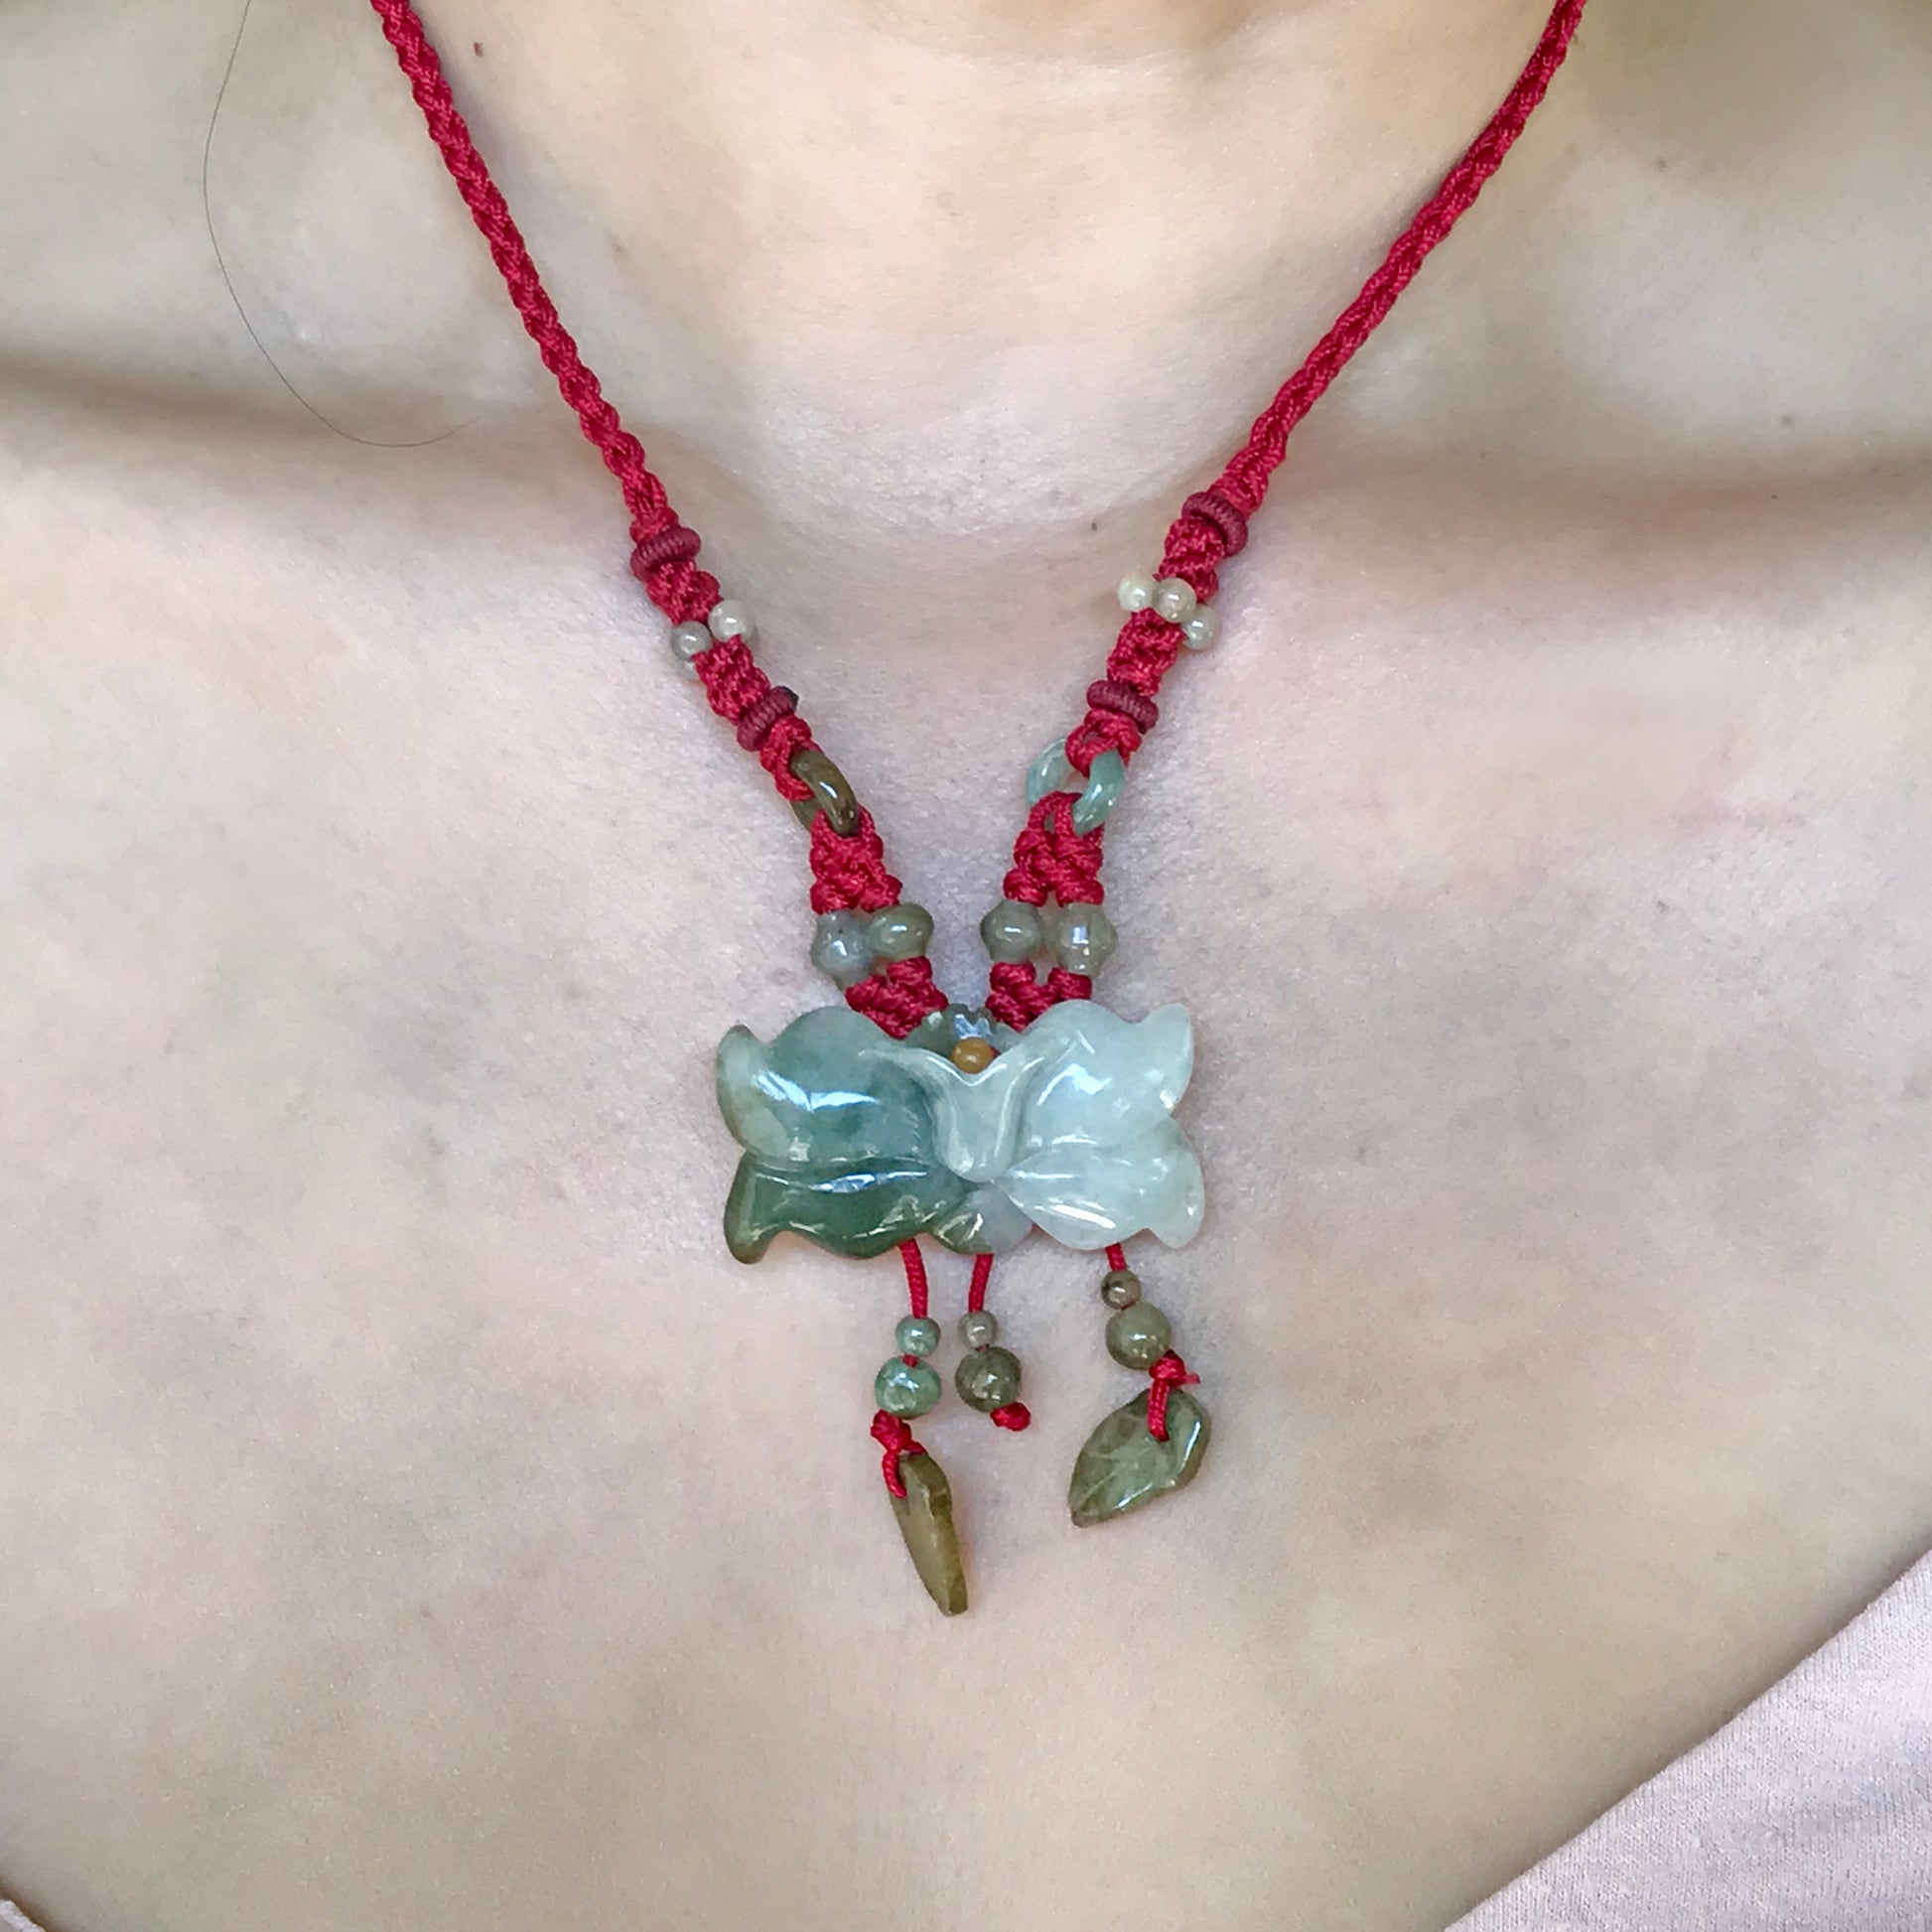 Beautifully Accessorized Wild Indigo Flower Handmade Jade Necklace with Red Cord